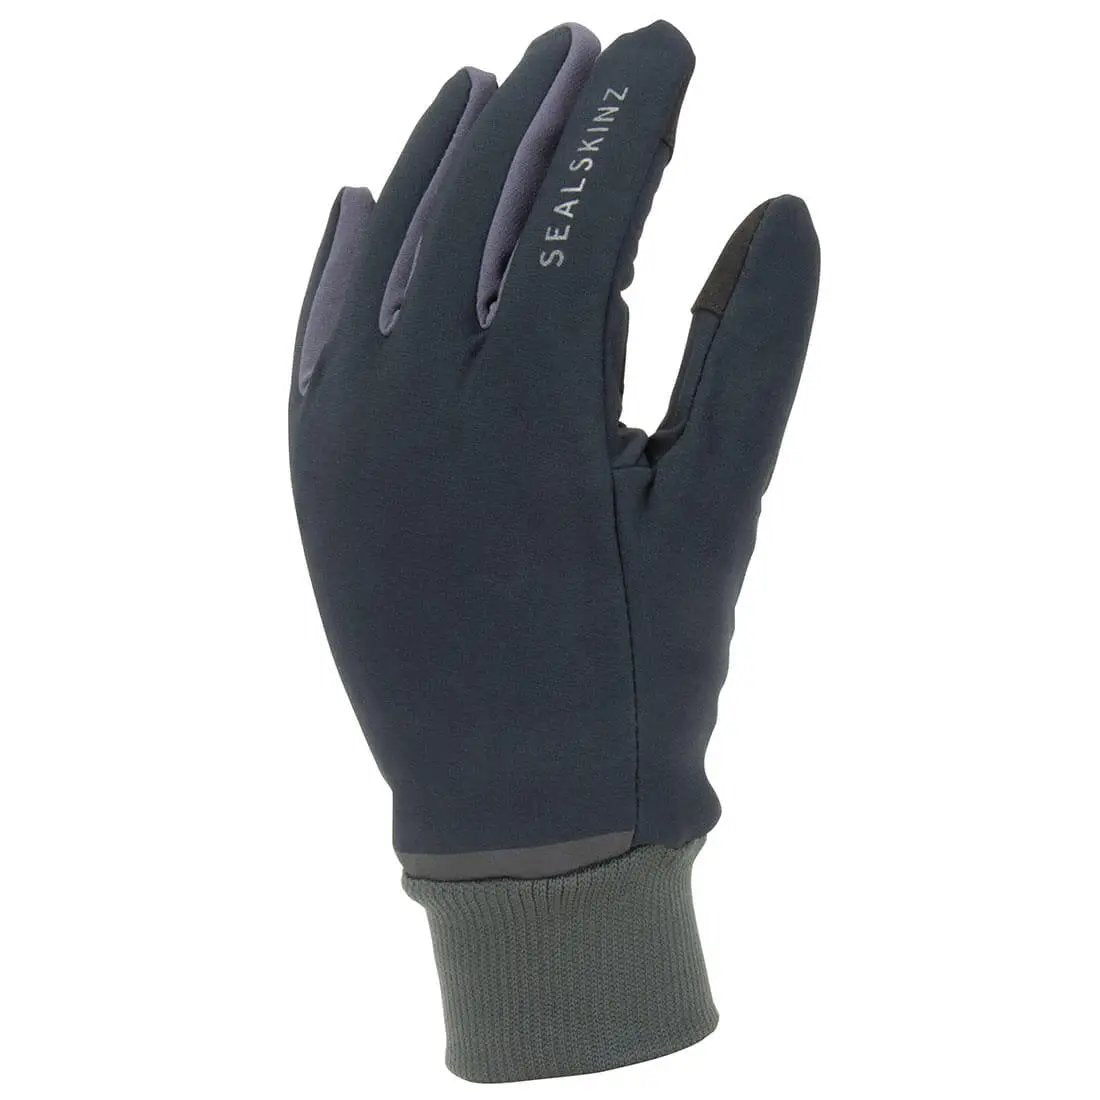 Sealskinz Waterproof All Weather Lightweight Glove with Fusion Control - John Bull Clothing